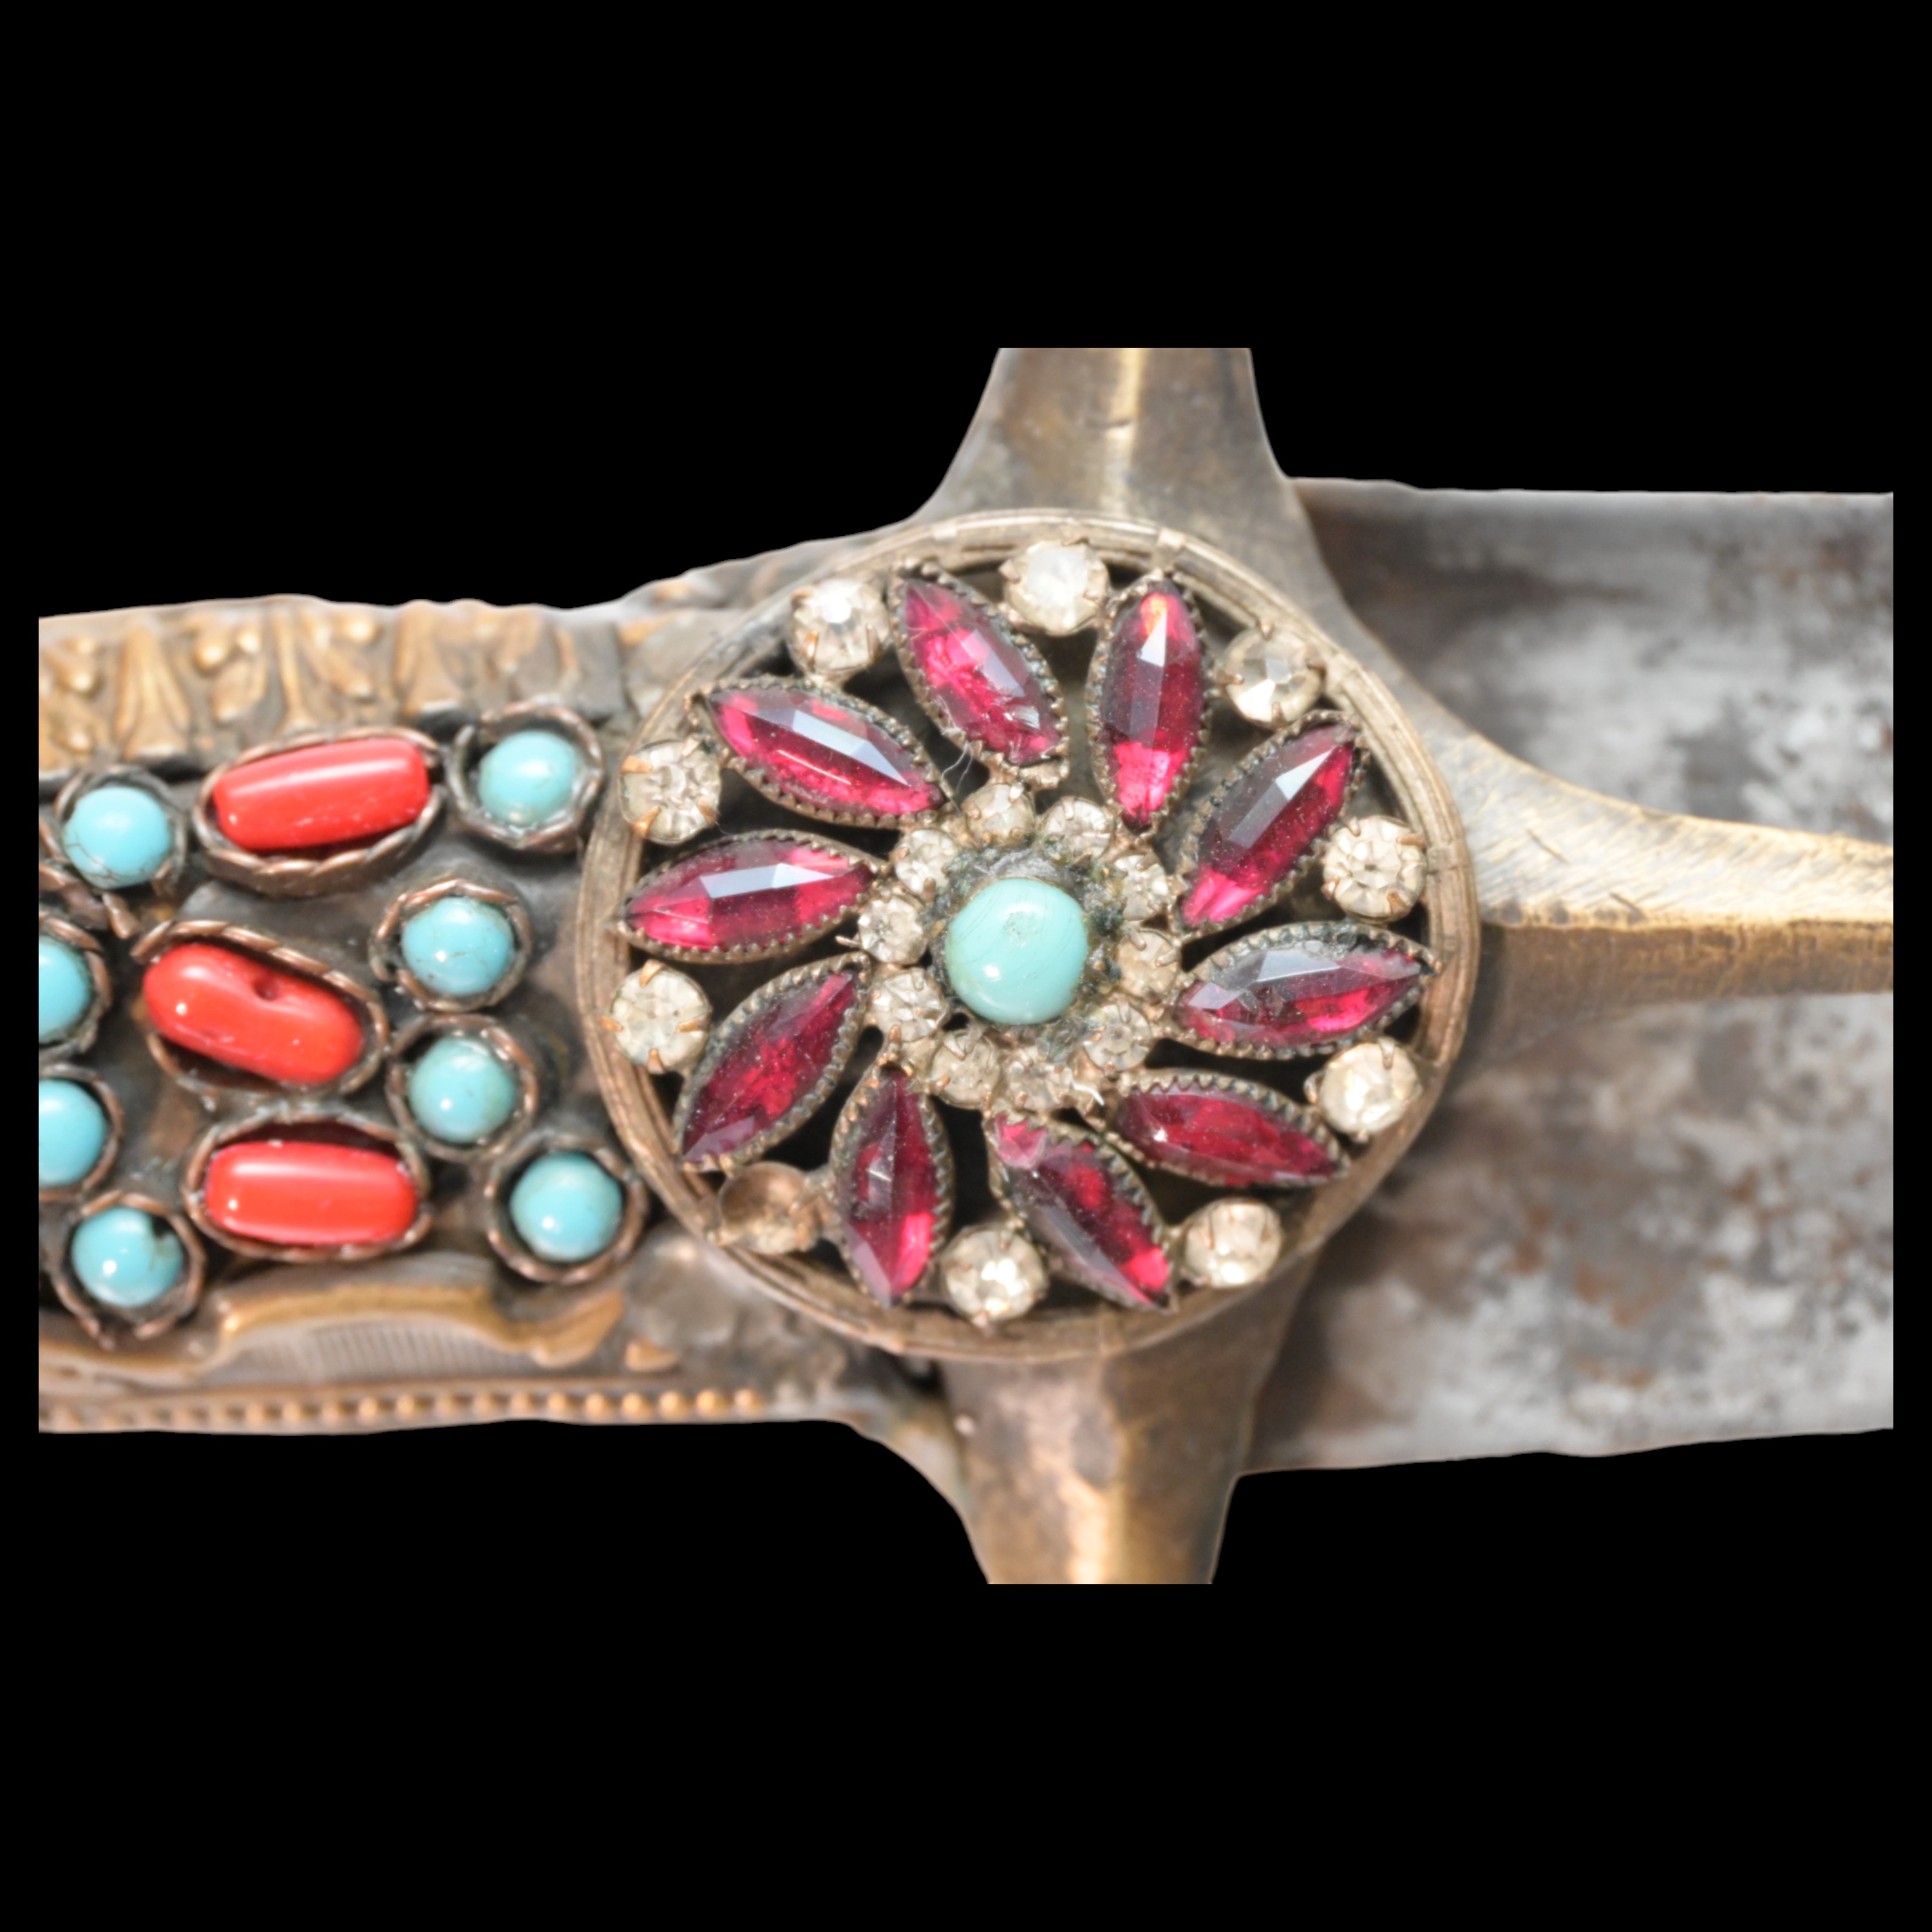 Rare Ottoman sword, Kilij, Pala, decorated with corals and turquoise, Turkey, Trabzon, around 1800. - Image 5 of 31